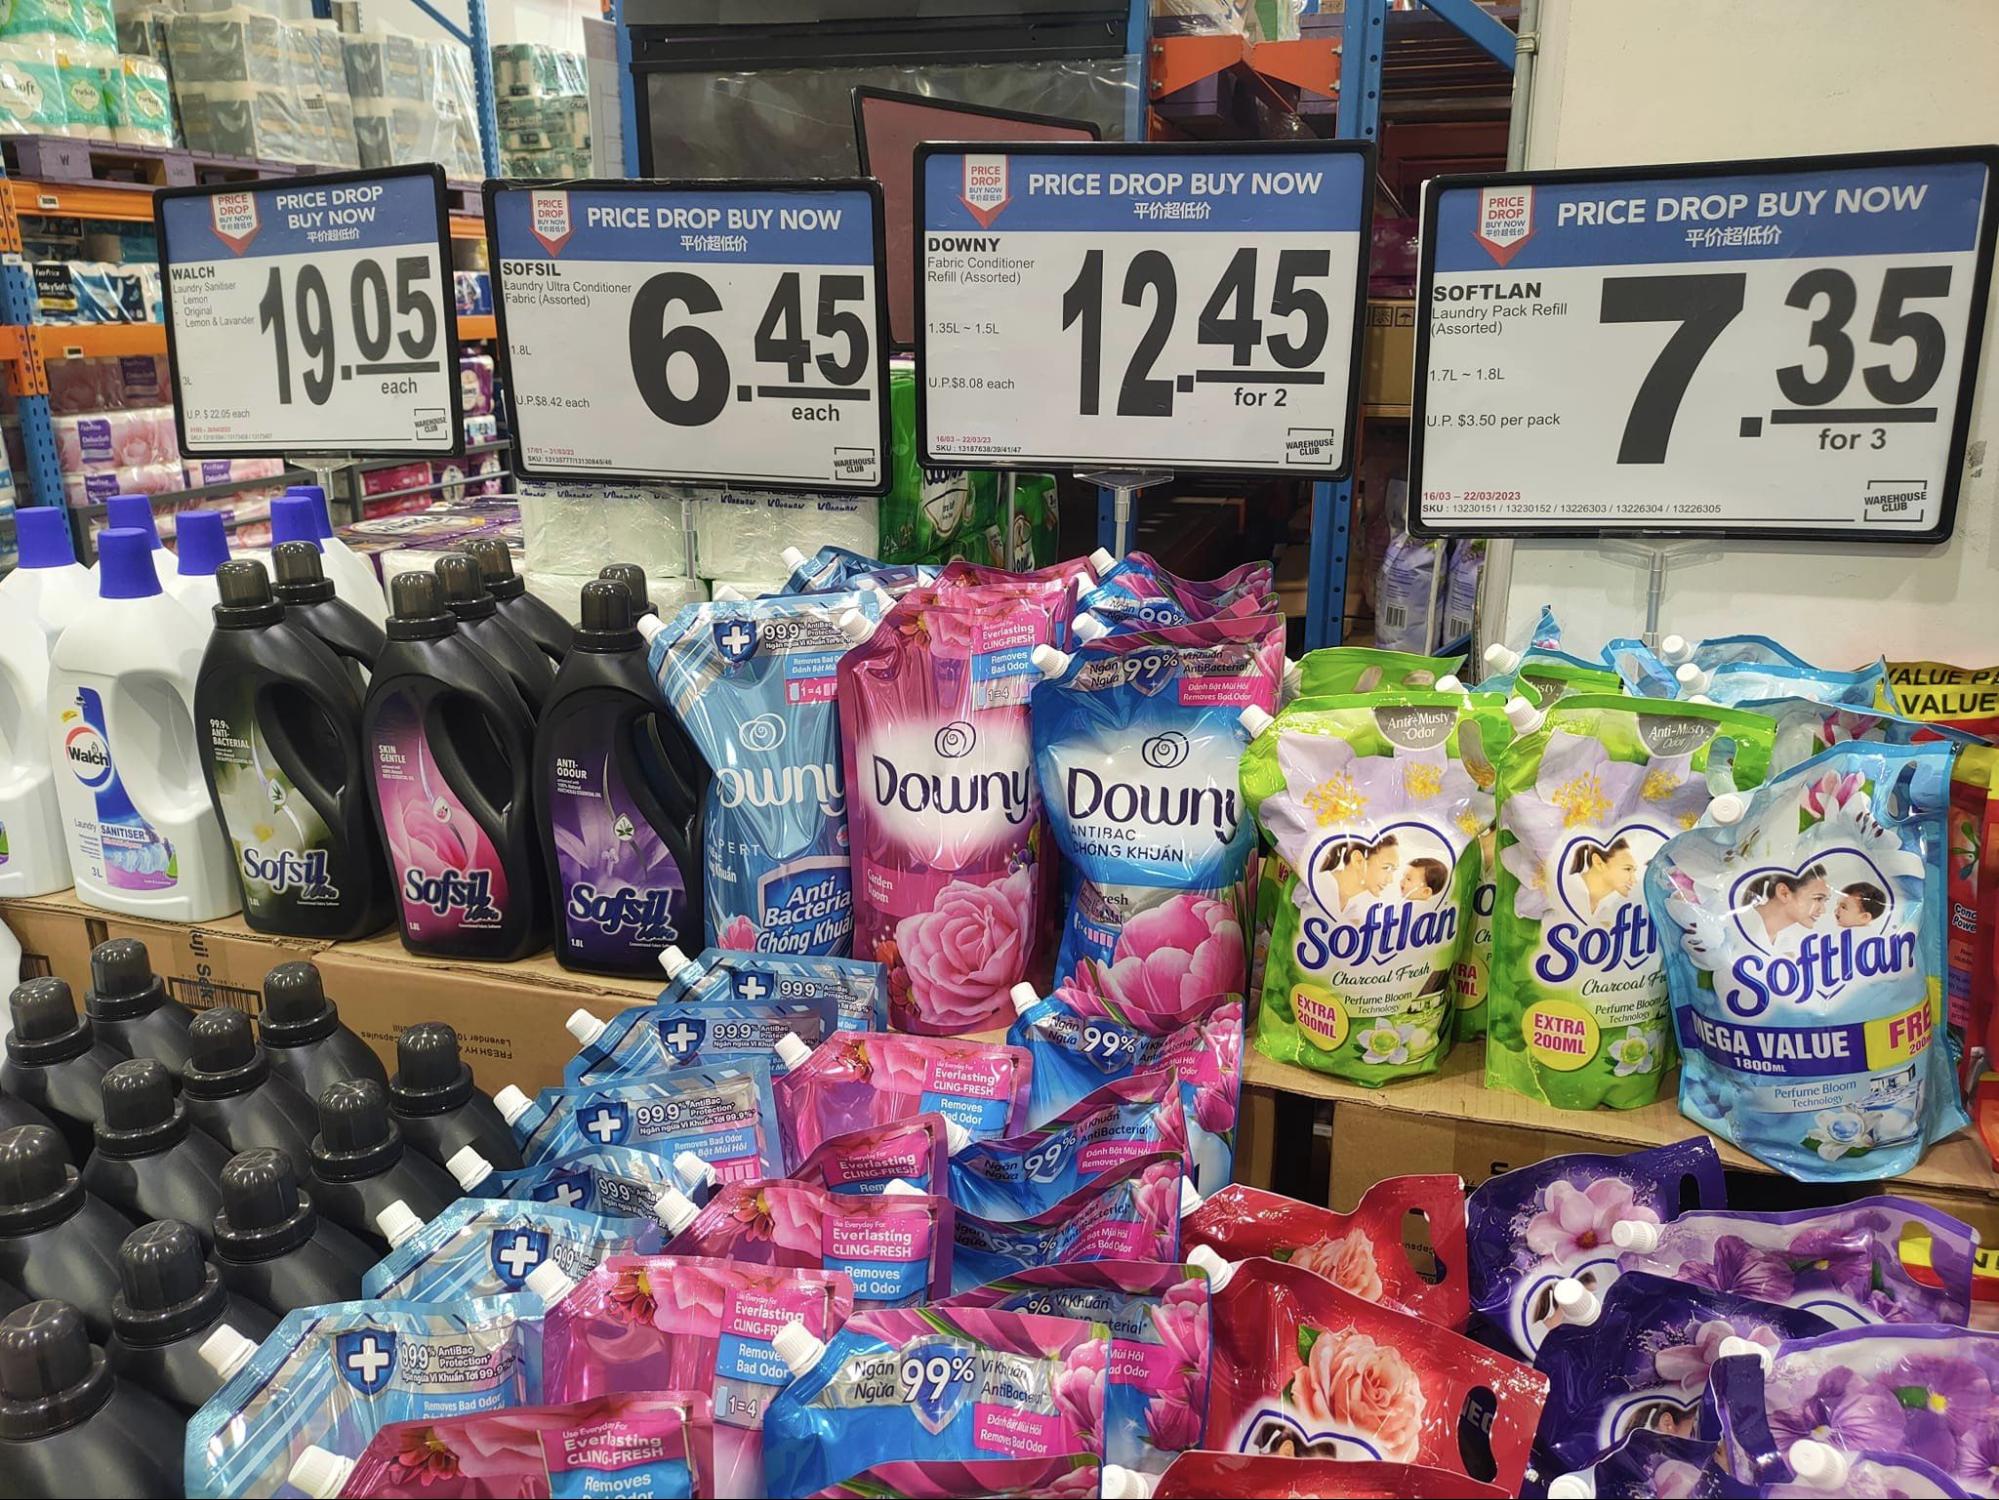 Things to do at FairPrice Hub - Laundry Detergent Deals